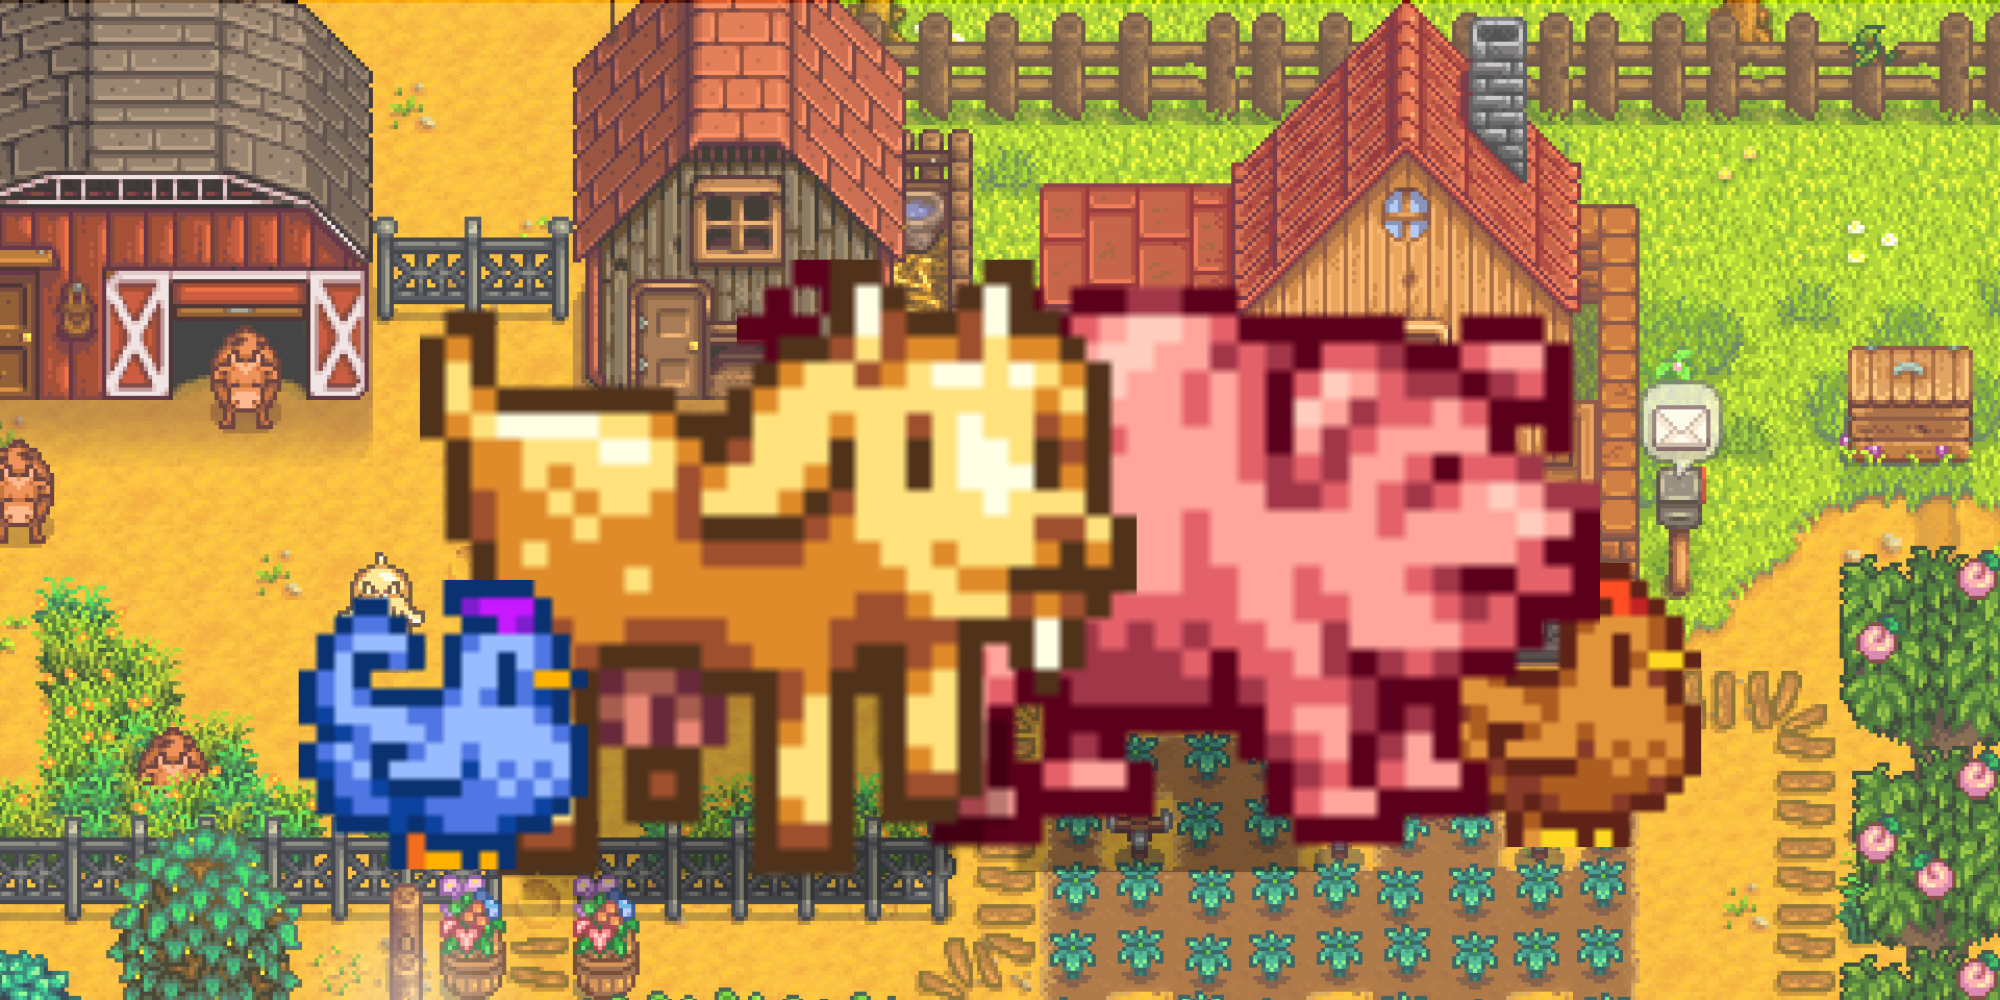 A blue chicken, a goat, a pig, and a brown chicken in Stardew Valley